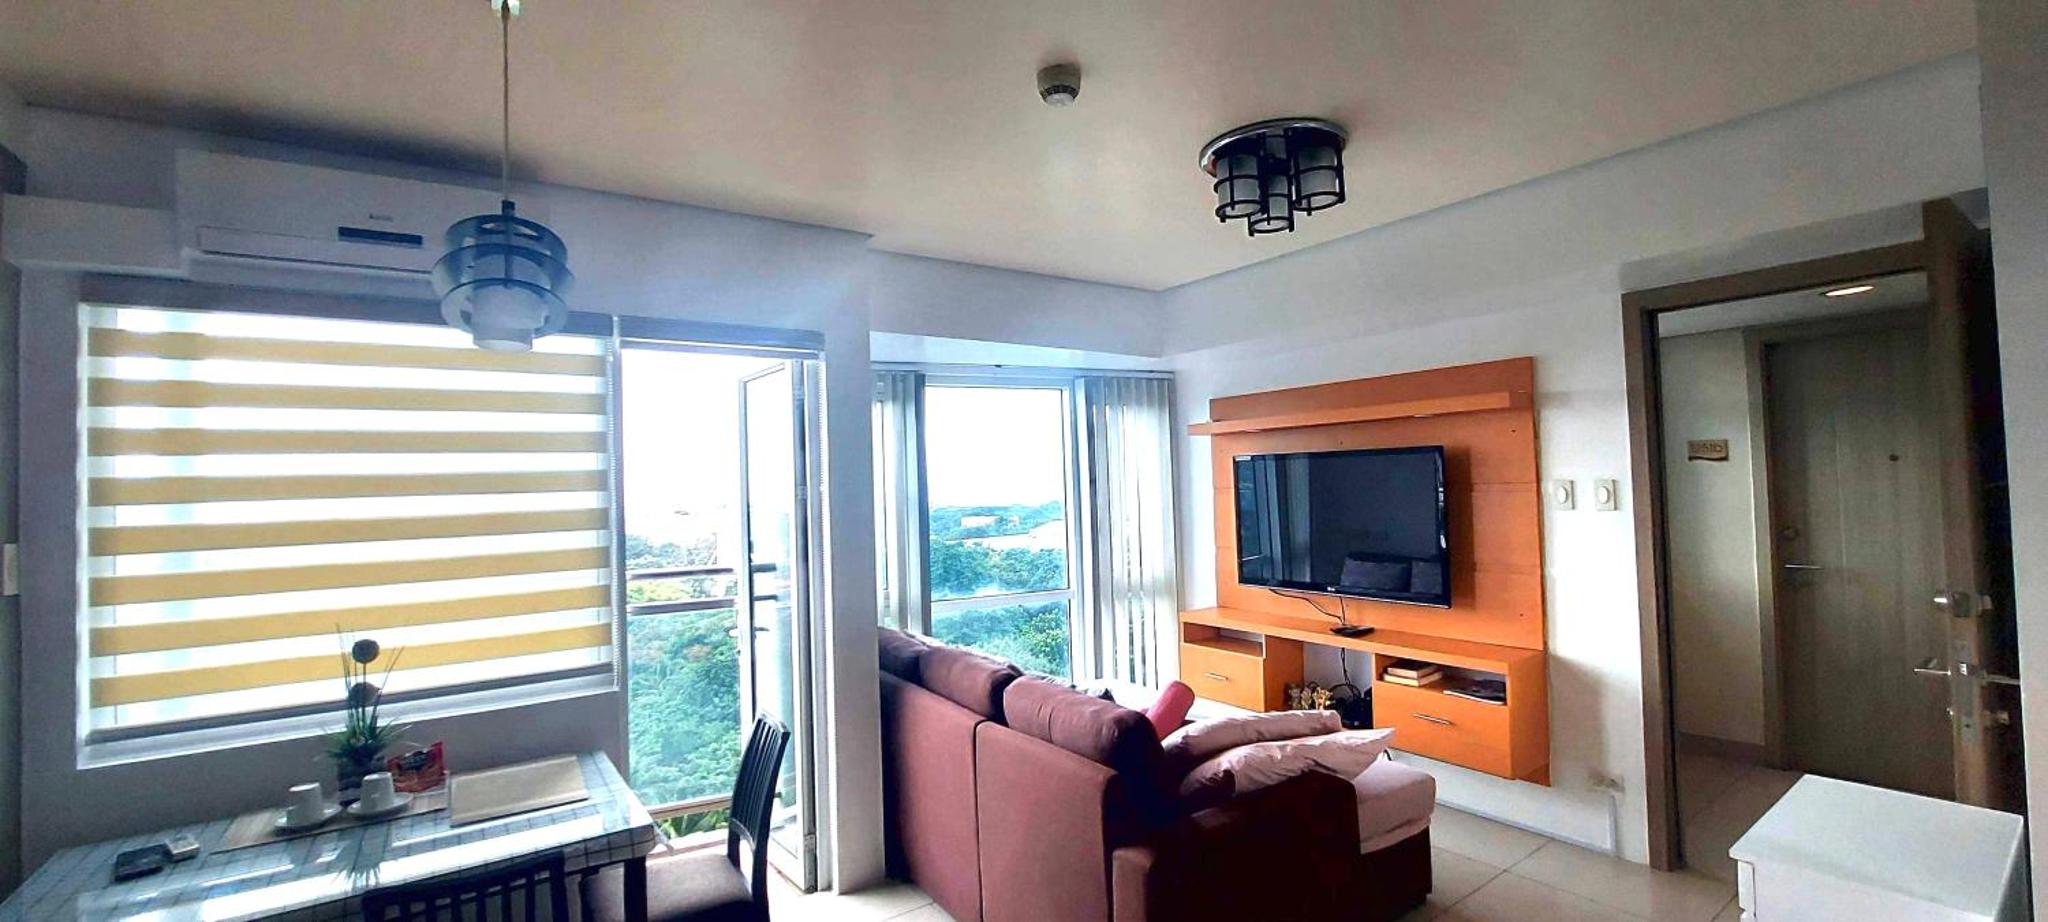 De Luxe, Standard and Studio Suites -The Breeze Residences-close to Airport, Mall of Asia, US Embassy